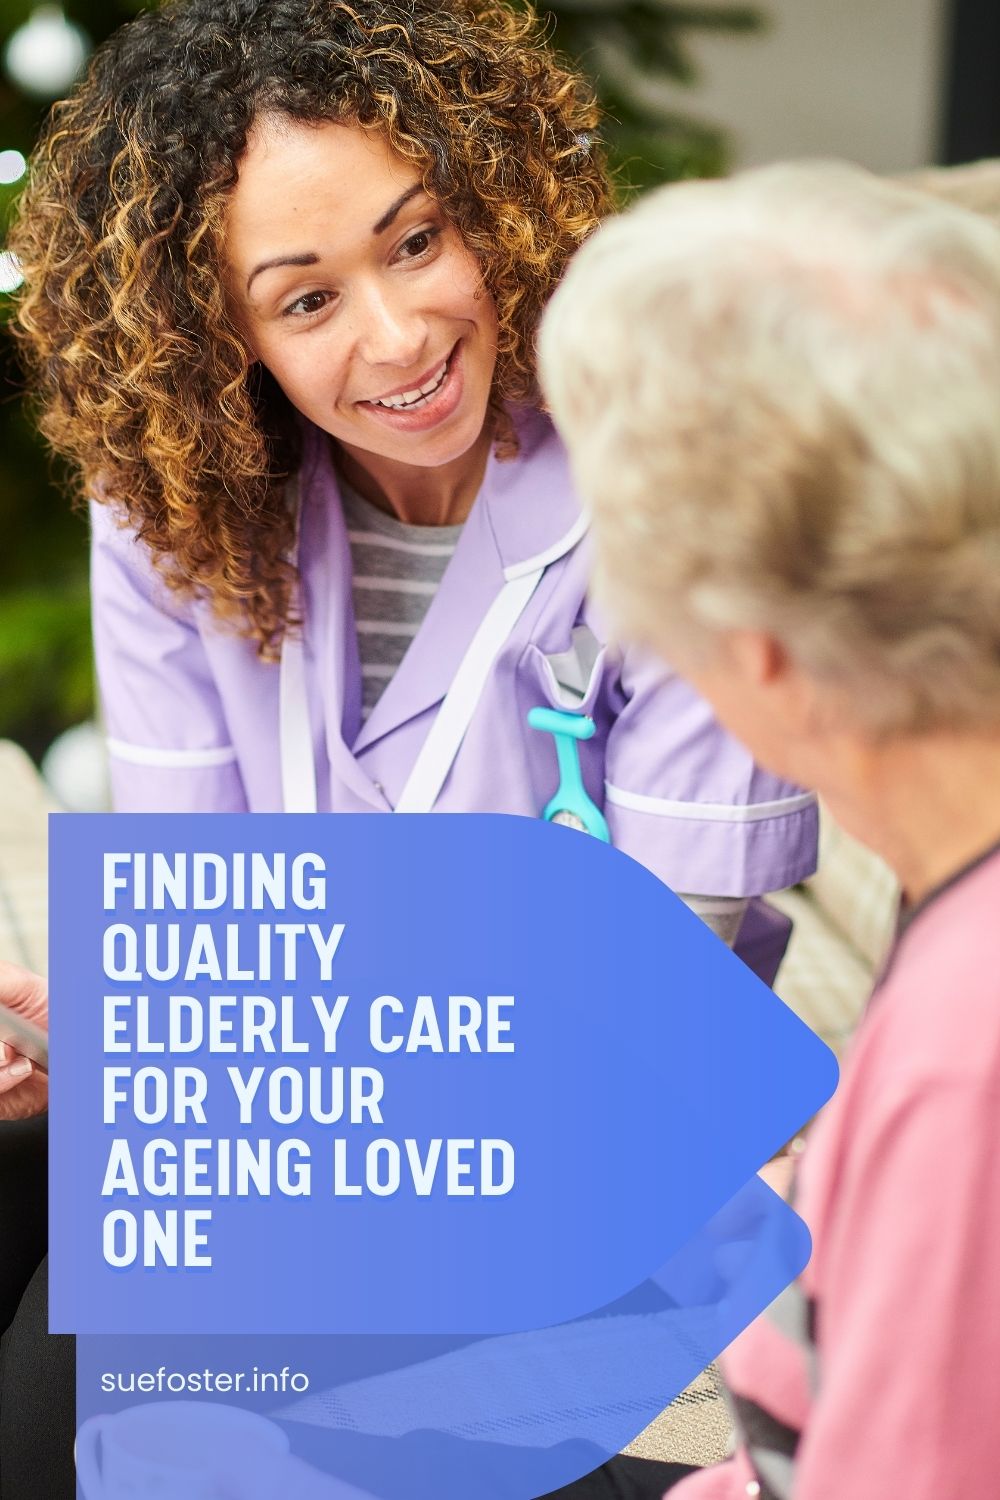 Are you looking for quality elderly care for your aging loved one? Here's how to make sure they receive the best possible care. 